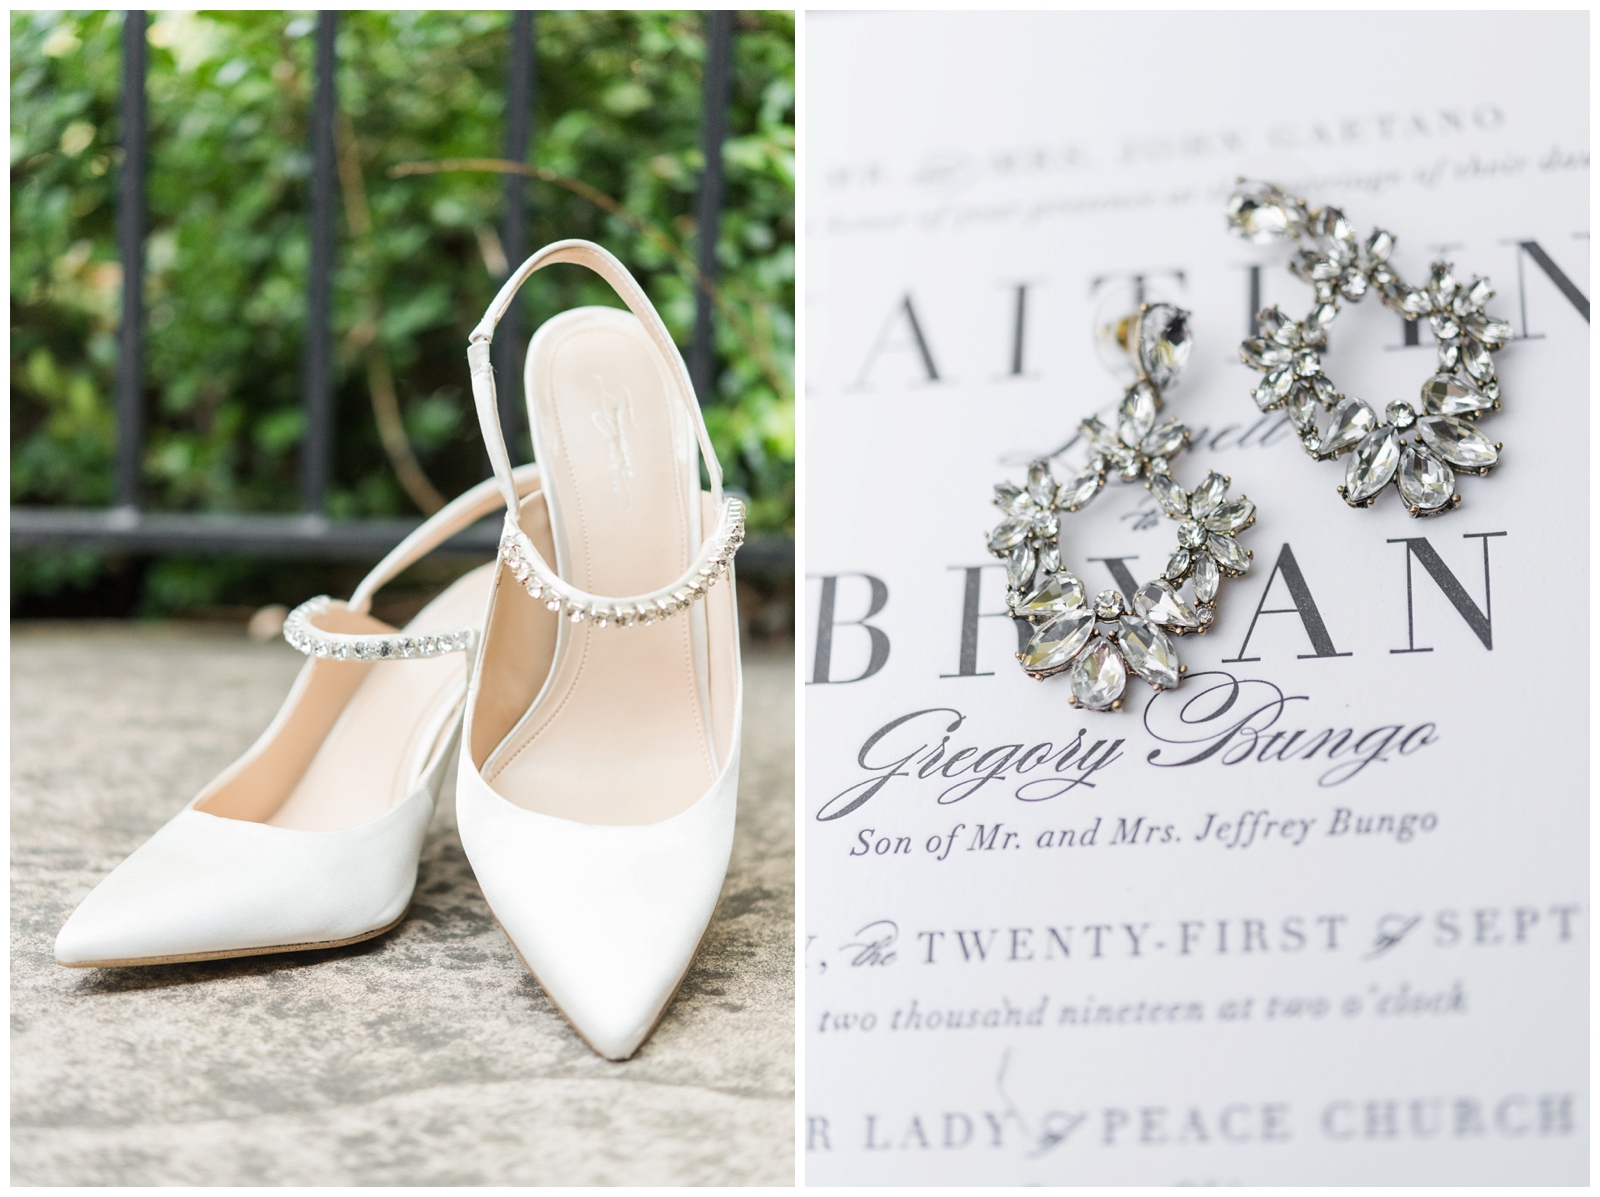 ivory shoes for the bride and dangling earrings on elegant wedding invitation by Pipers Photography